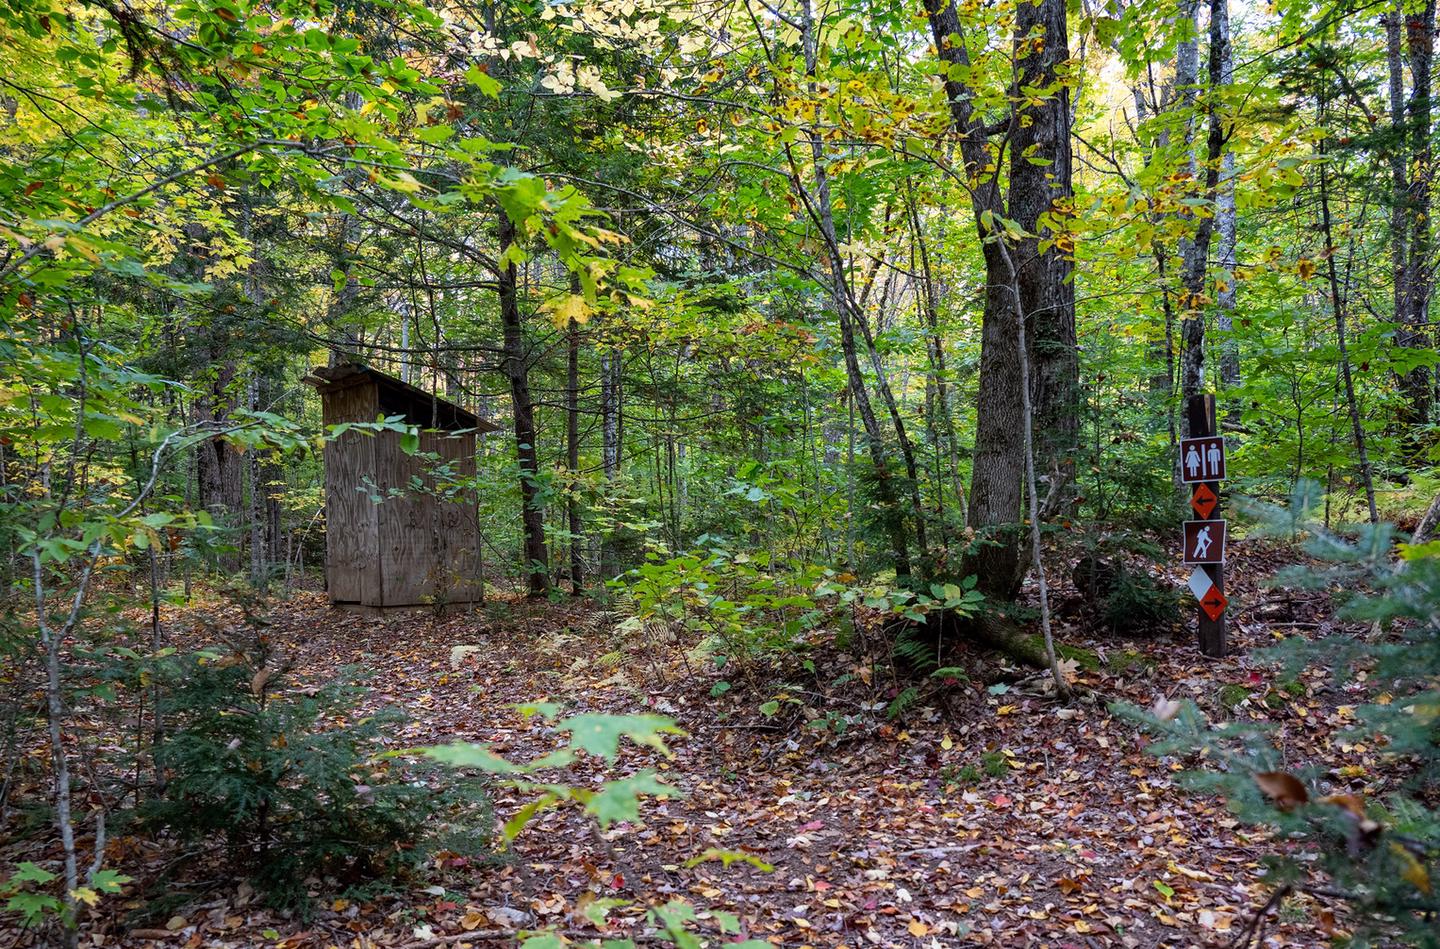 A rectangular wooden outhouse tucked behind branches in the woods away from the main trail on the left. The vegetation is mostly green and densely overgrown in the forest with some leaves changing from green to yellow and oranges. A wooden post is to the right of the trail with icons that tell visitors directions.An outhouse is available for use. Follow the trail up the hill and away from the campsite to access it.